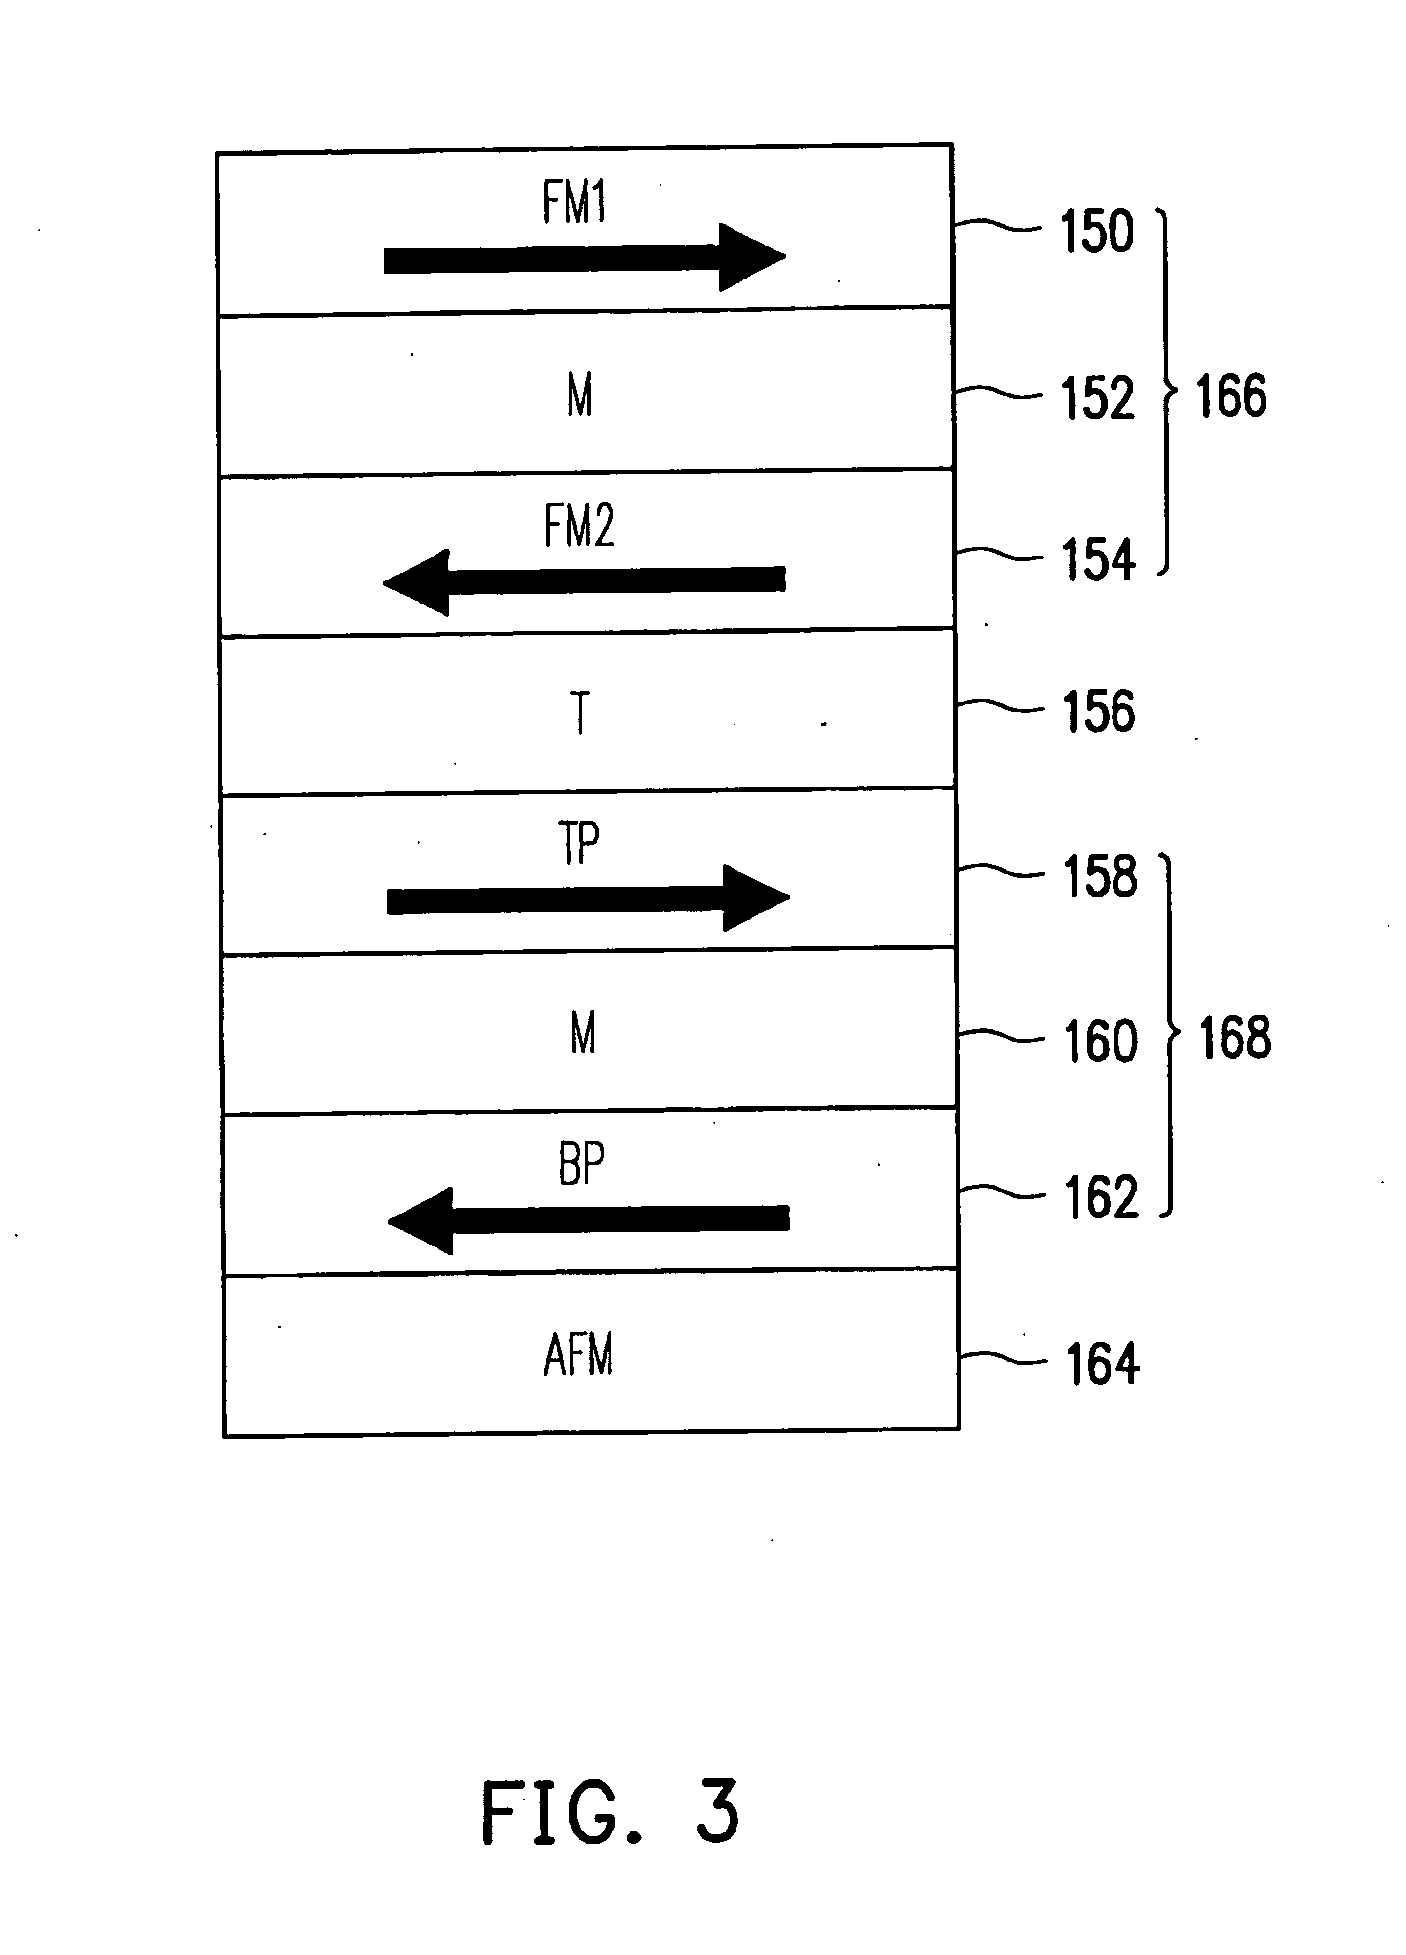 Magnetic memory cell structure with thermal assistant and magnetic random access memory